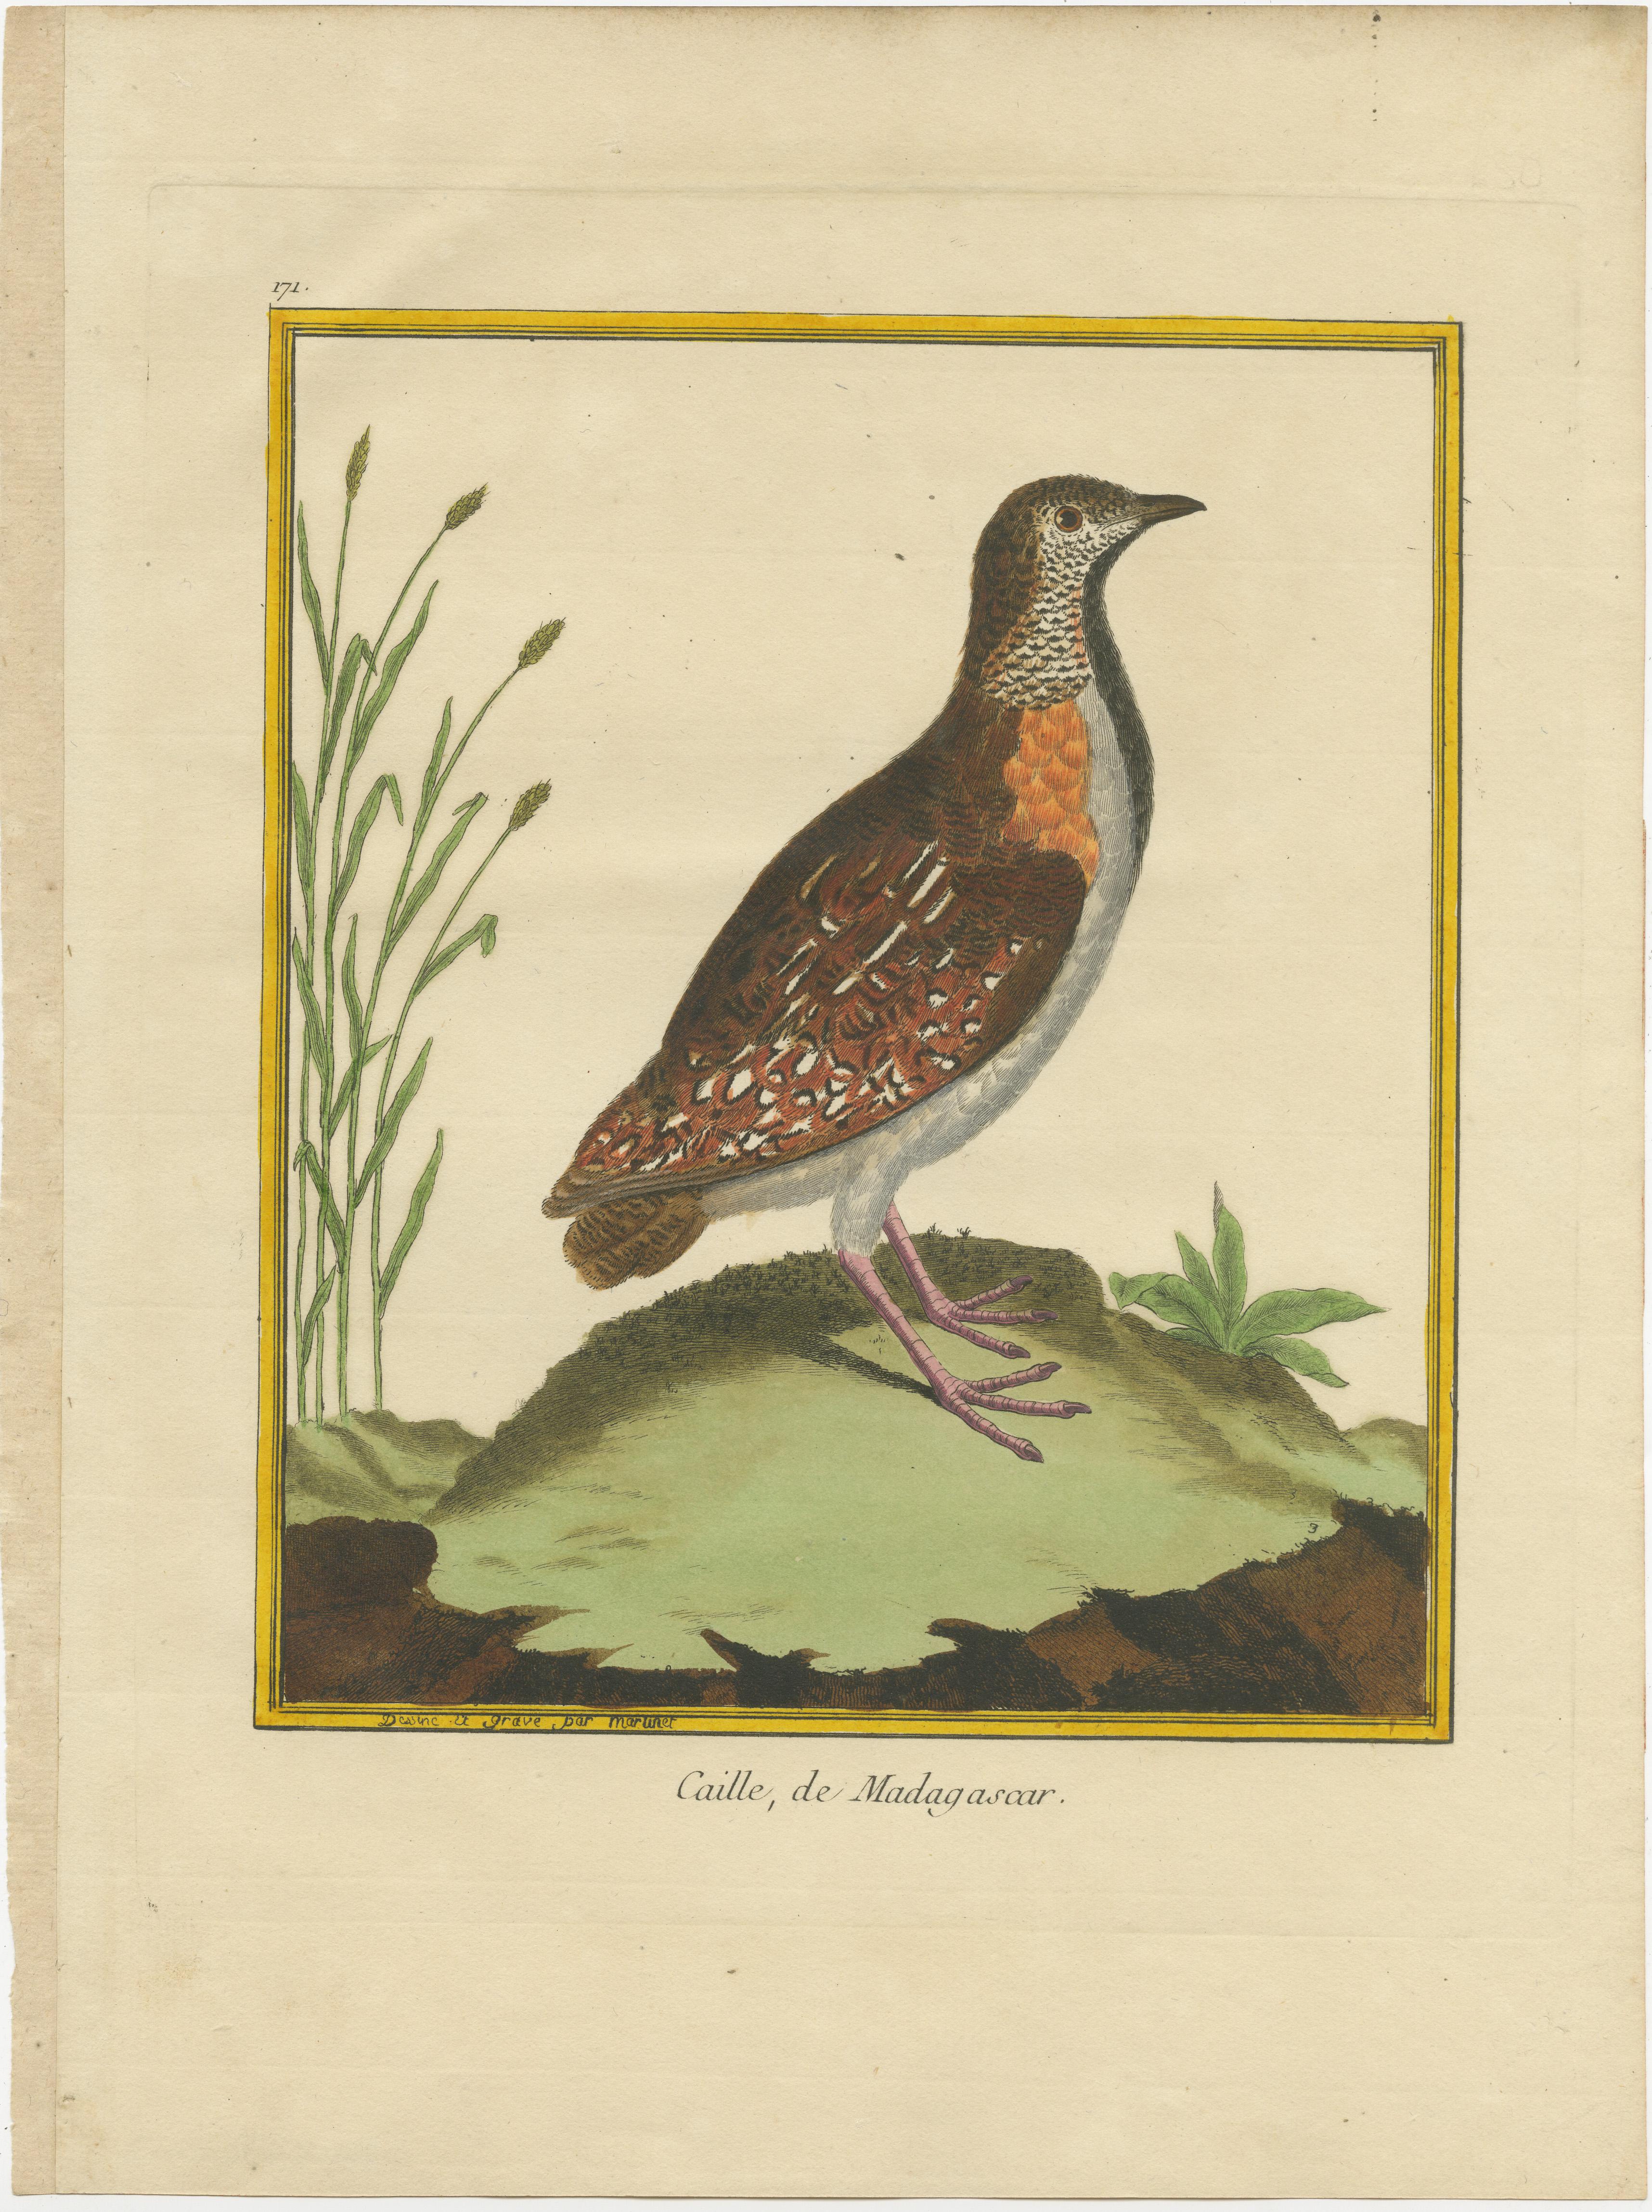 Antique print titled 'Caille, de Madagascar'. Hand colored engraving of a Madagascar buttonquail (Turnix nigricollis), a species of bird in the buttonquail family, Turnicidae, that is endemic to Madagascar and a few small islands nearby. 

This